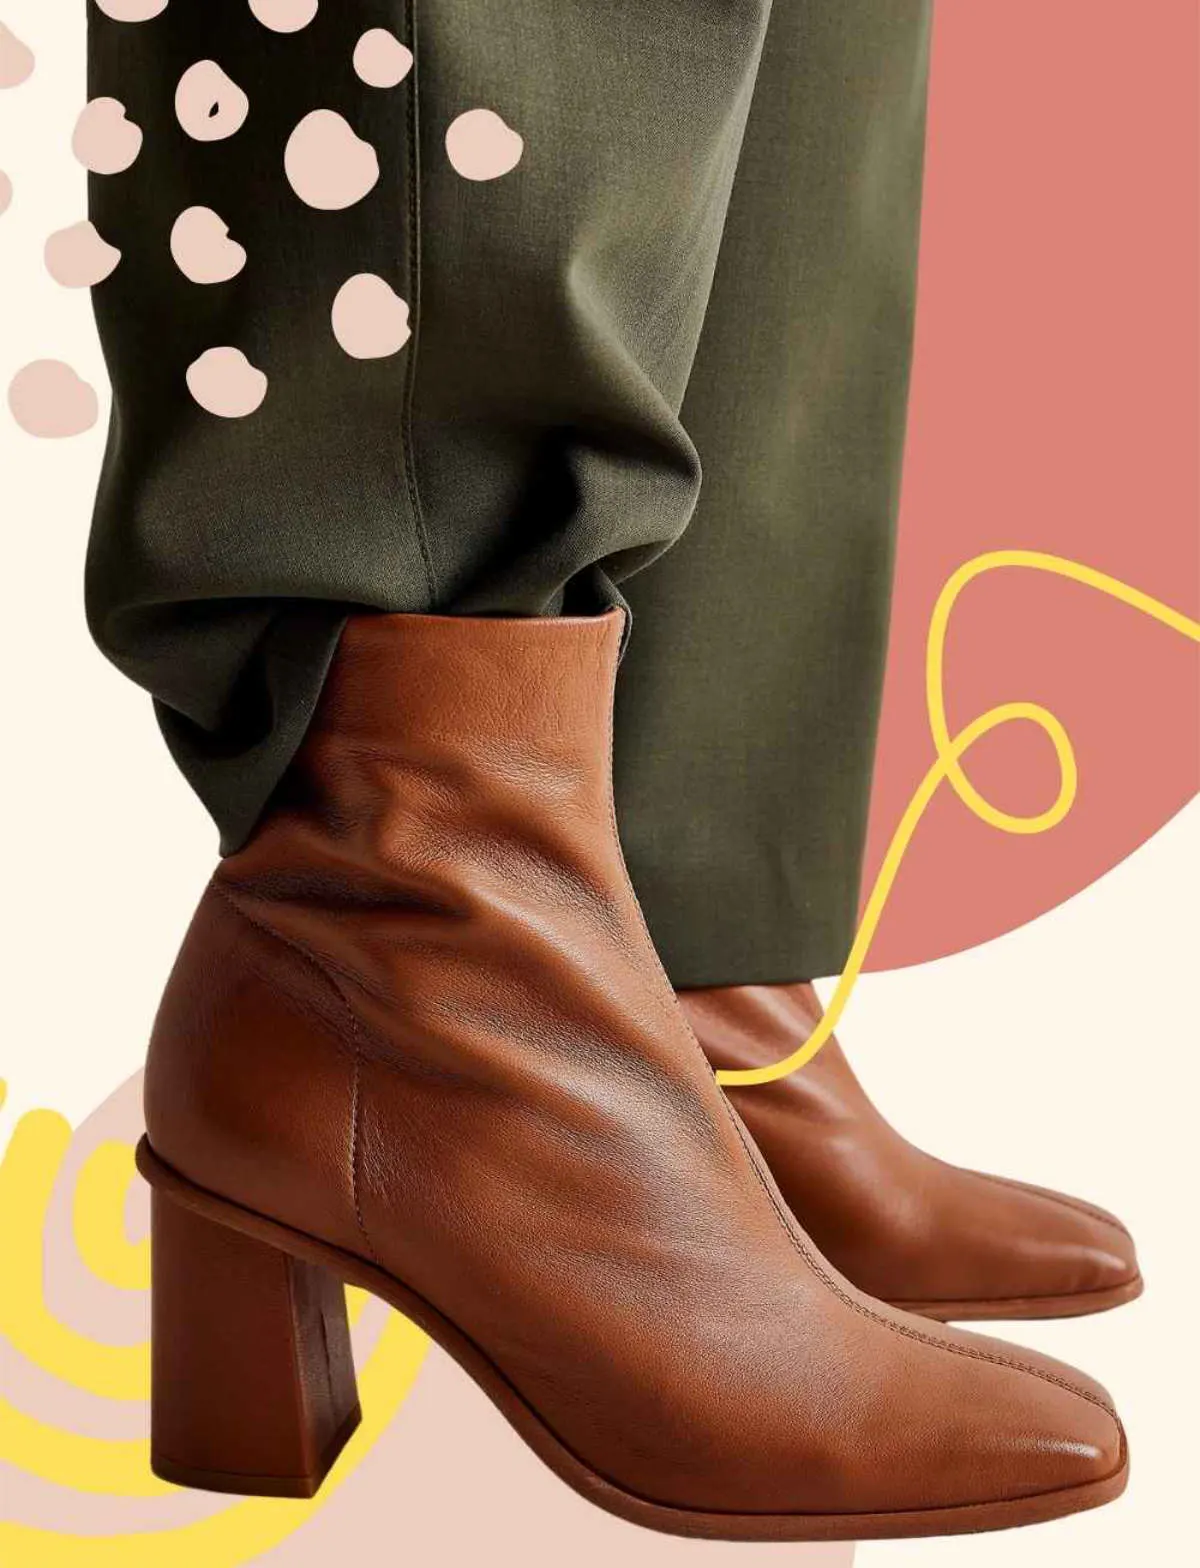 Style Guide How To Wear Ankle Boots With Jeans  Chic Pursuit The Best In  Styling Luxury Fashion  Beauty